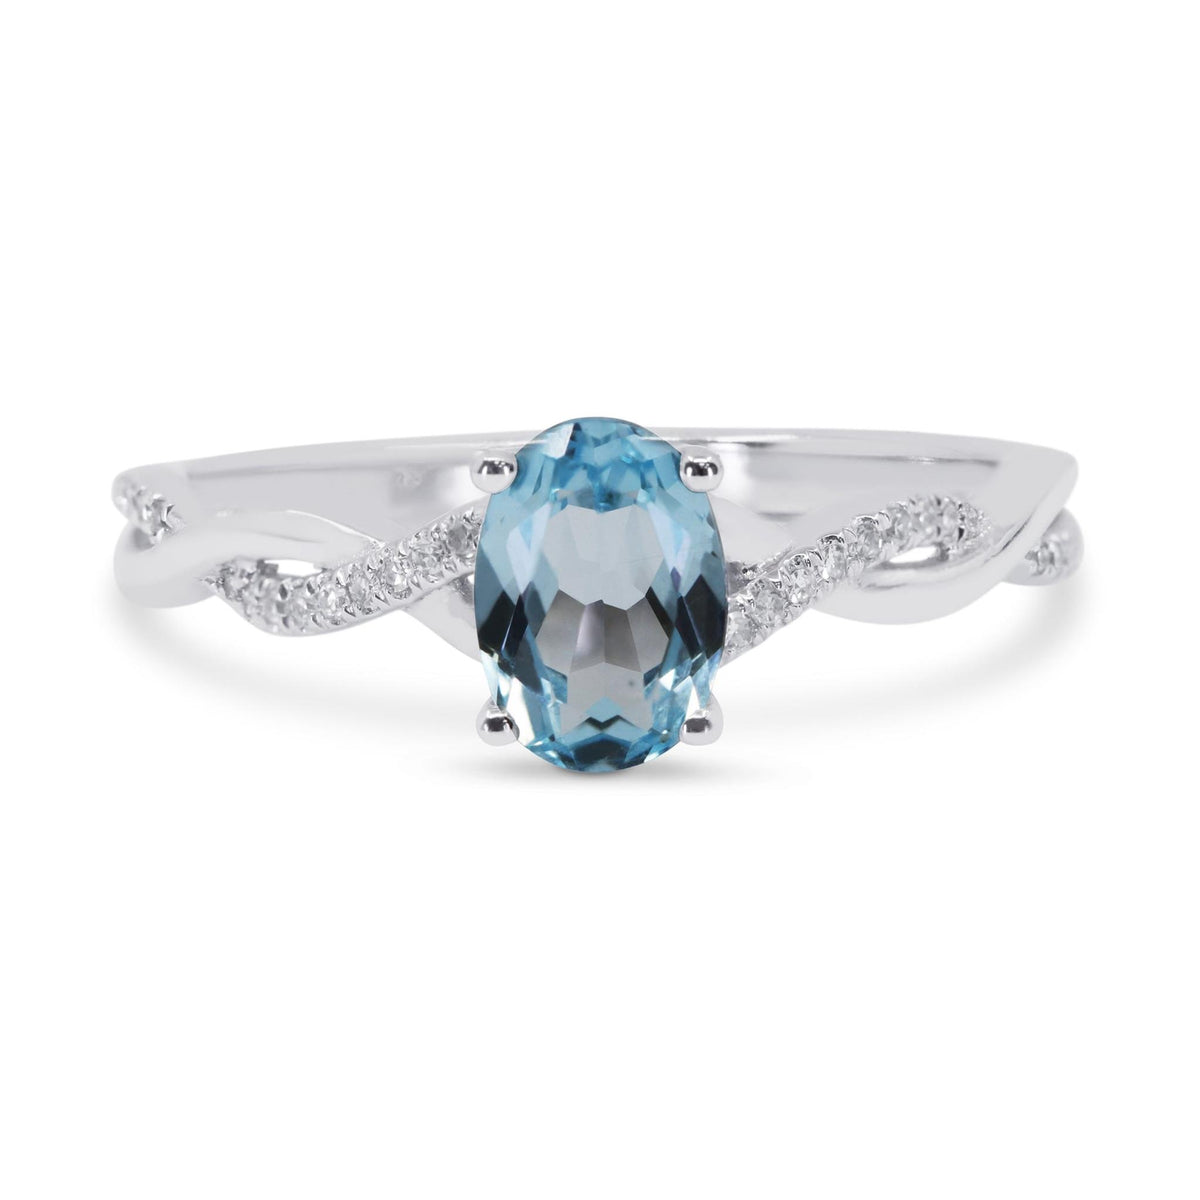 14Kt White Gold Classic Gemstone Ring With 1.03ct Blue Topaz